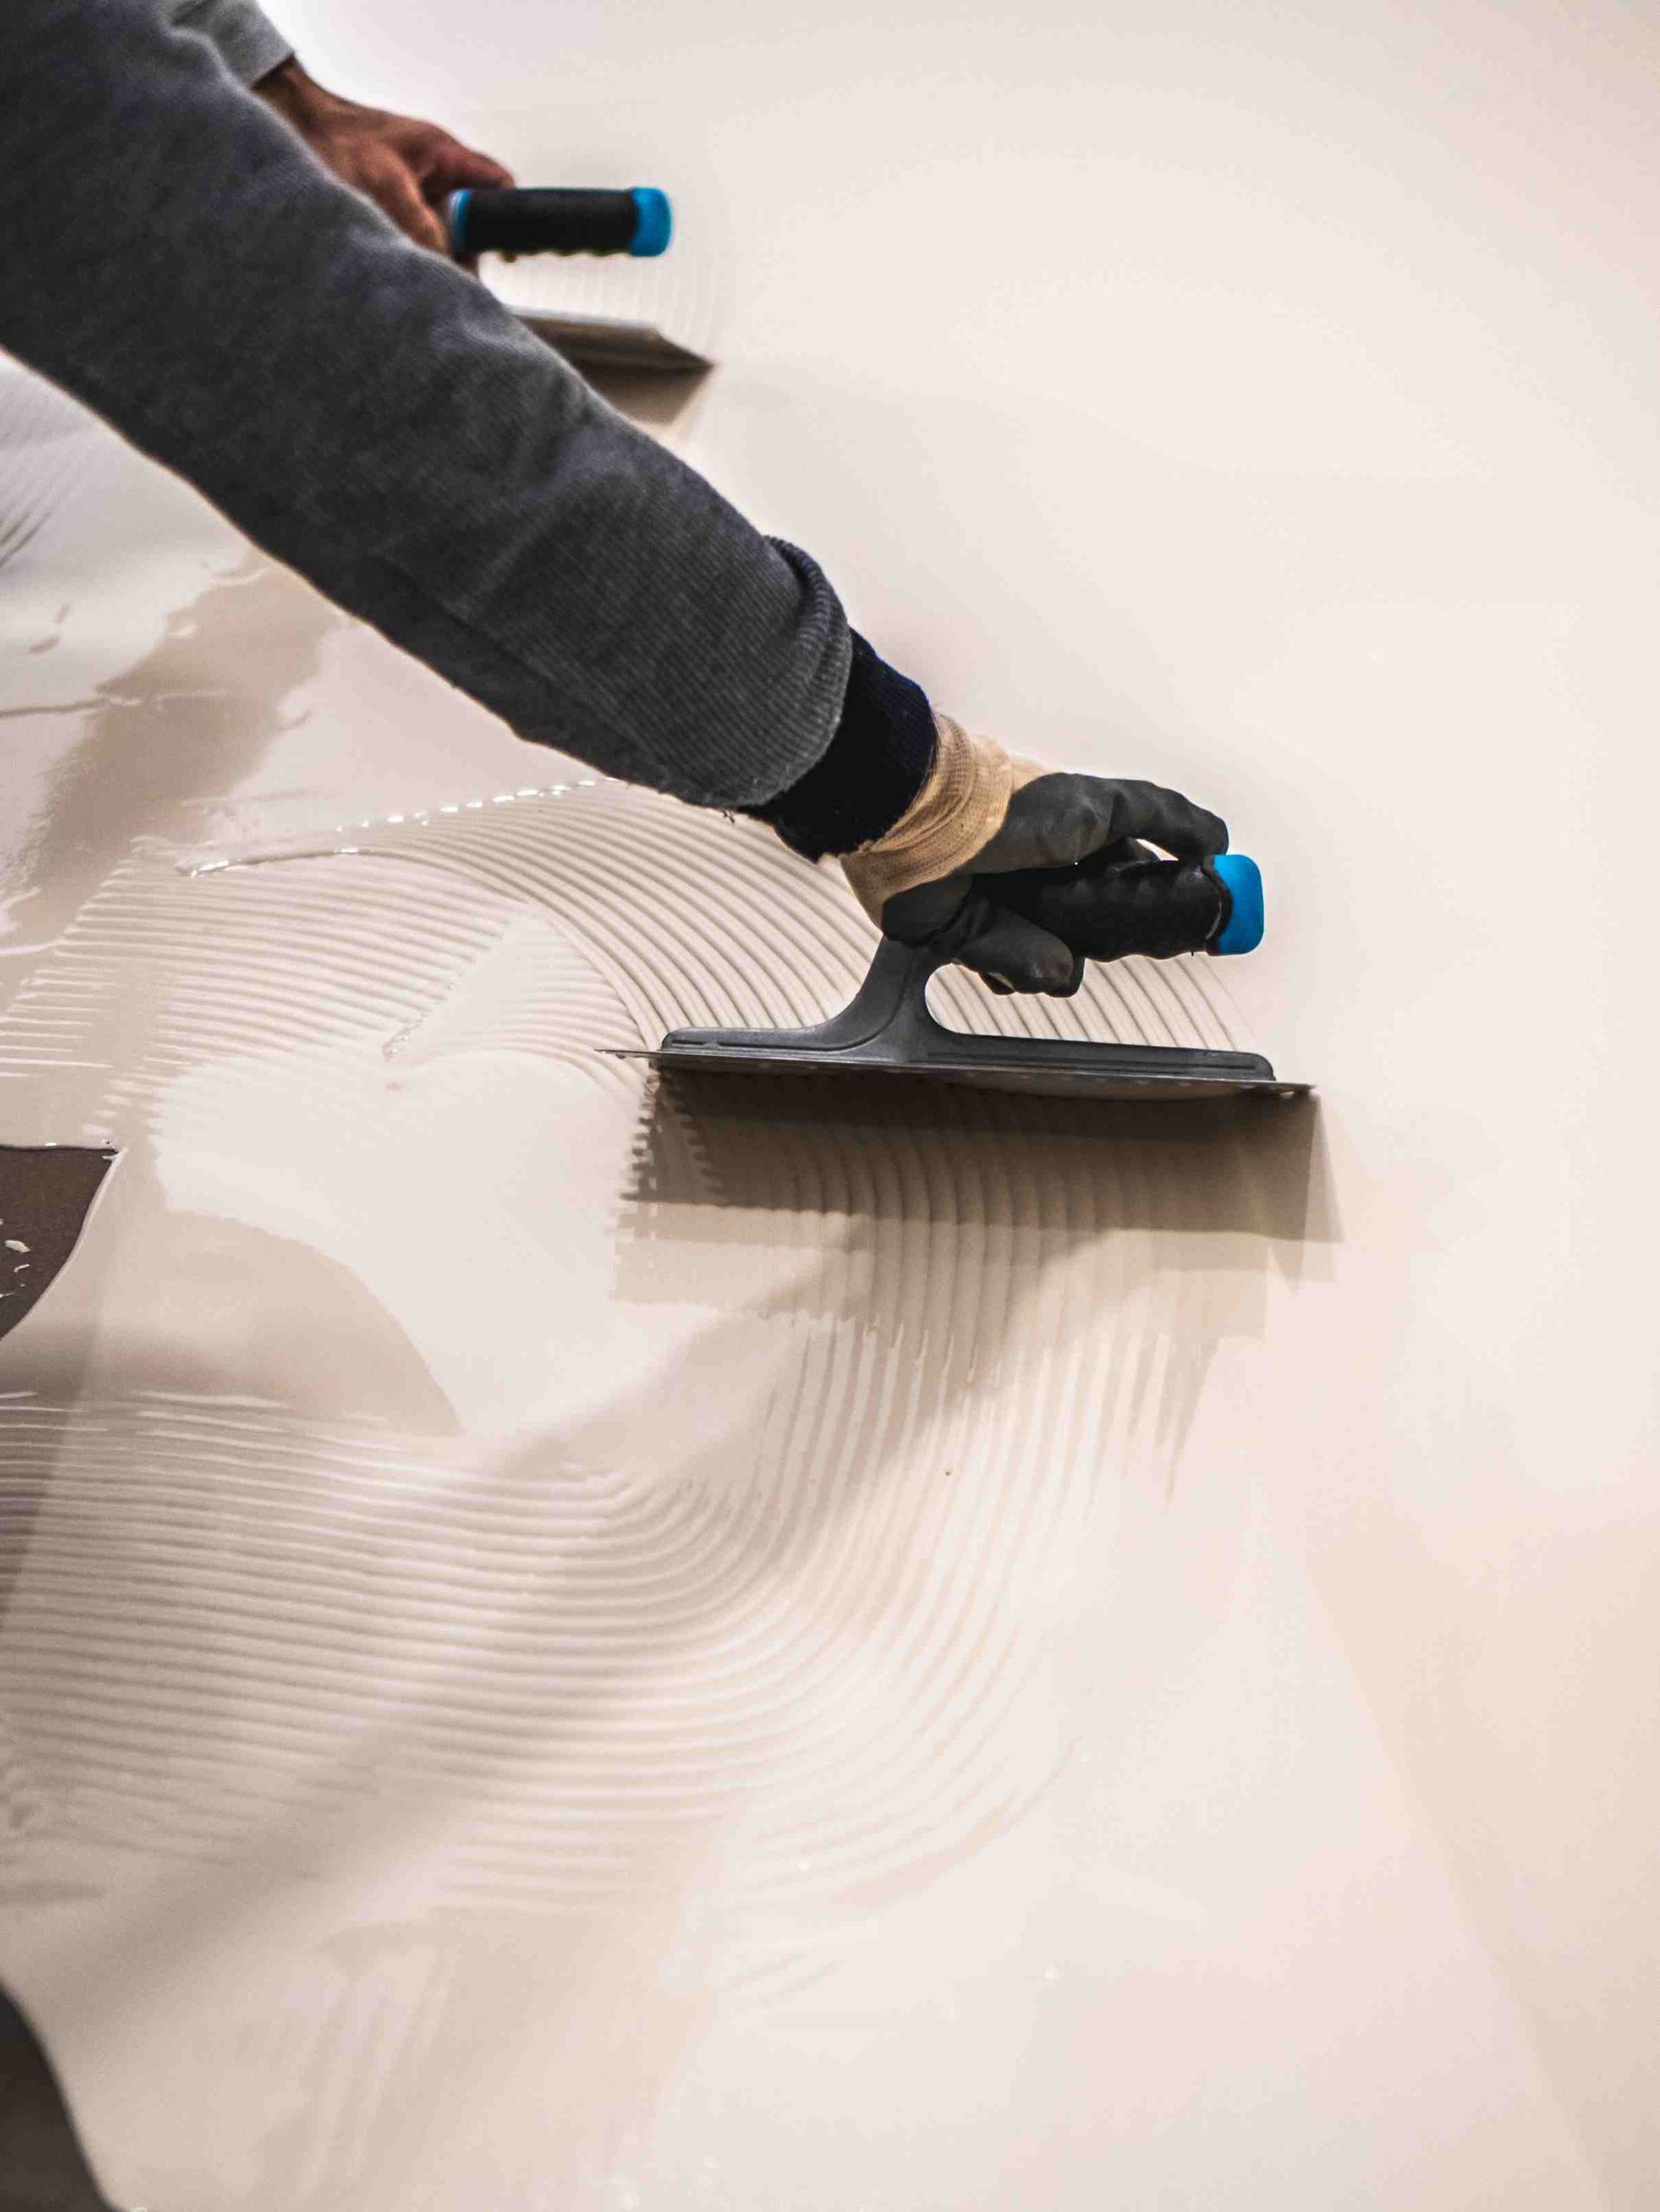 A worker applying coating to floors